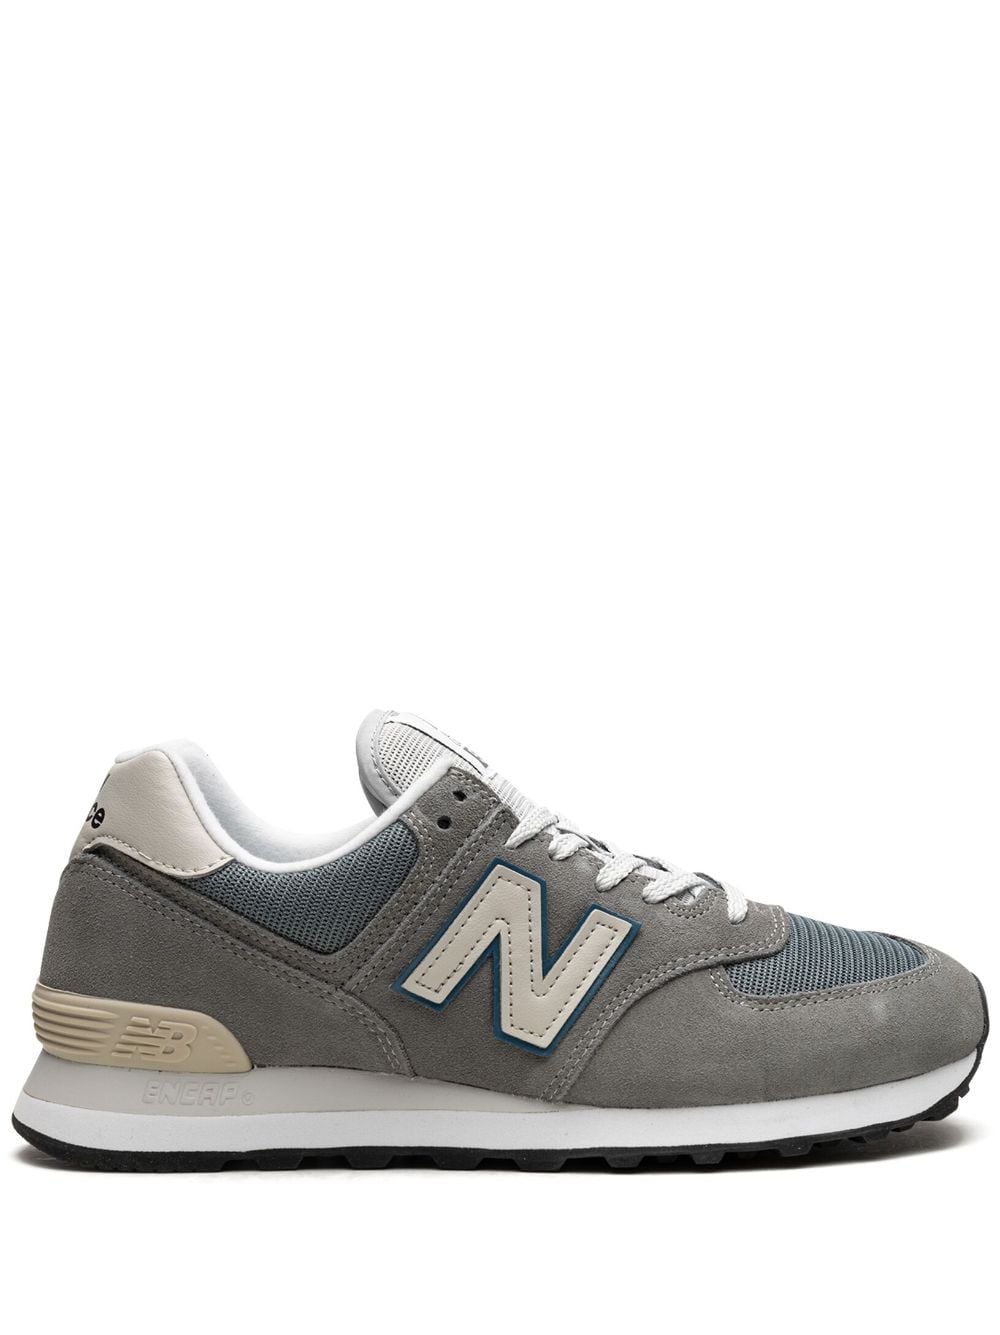 New Balance 574 Low-top Sneakers In Grey